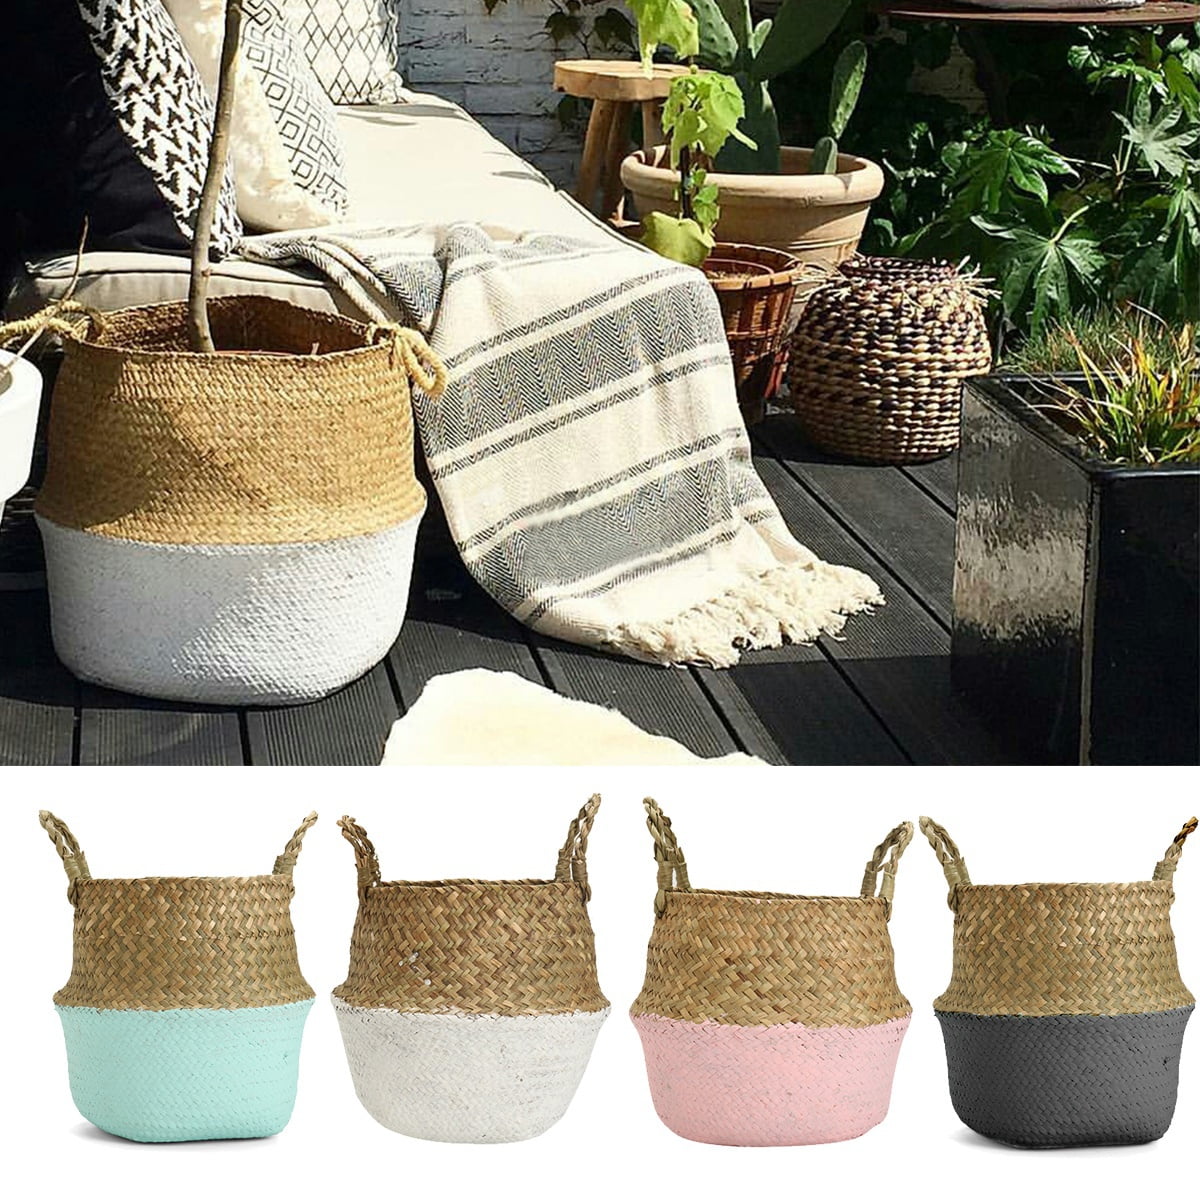 Handmade Rattan Bellied Basket Foldable Plant Flower Pot Storage Container 